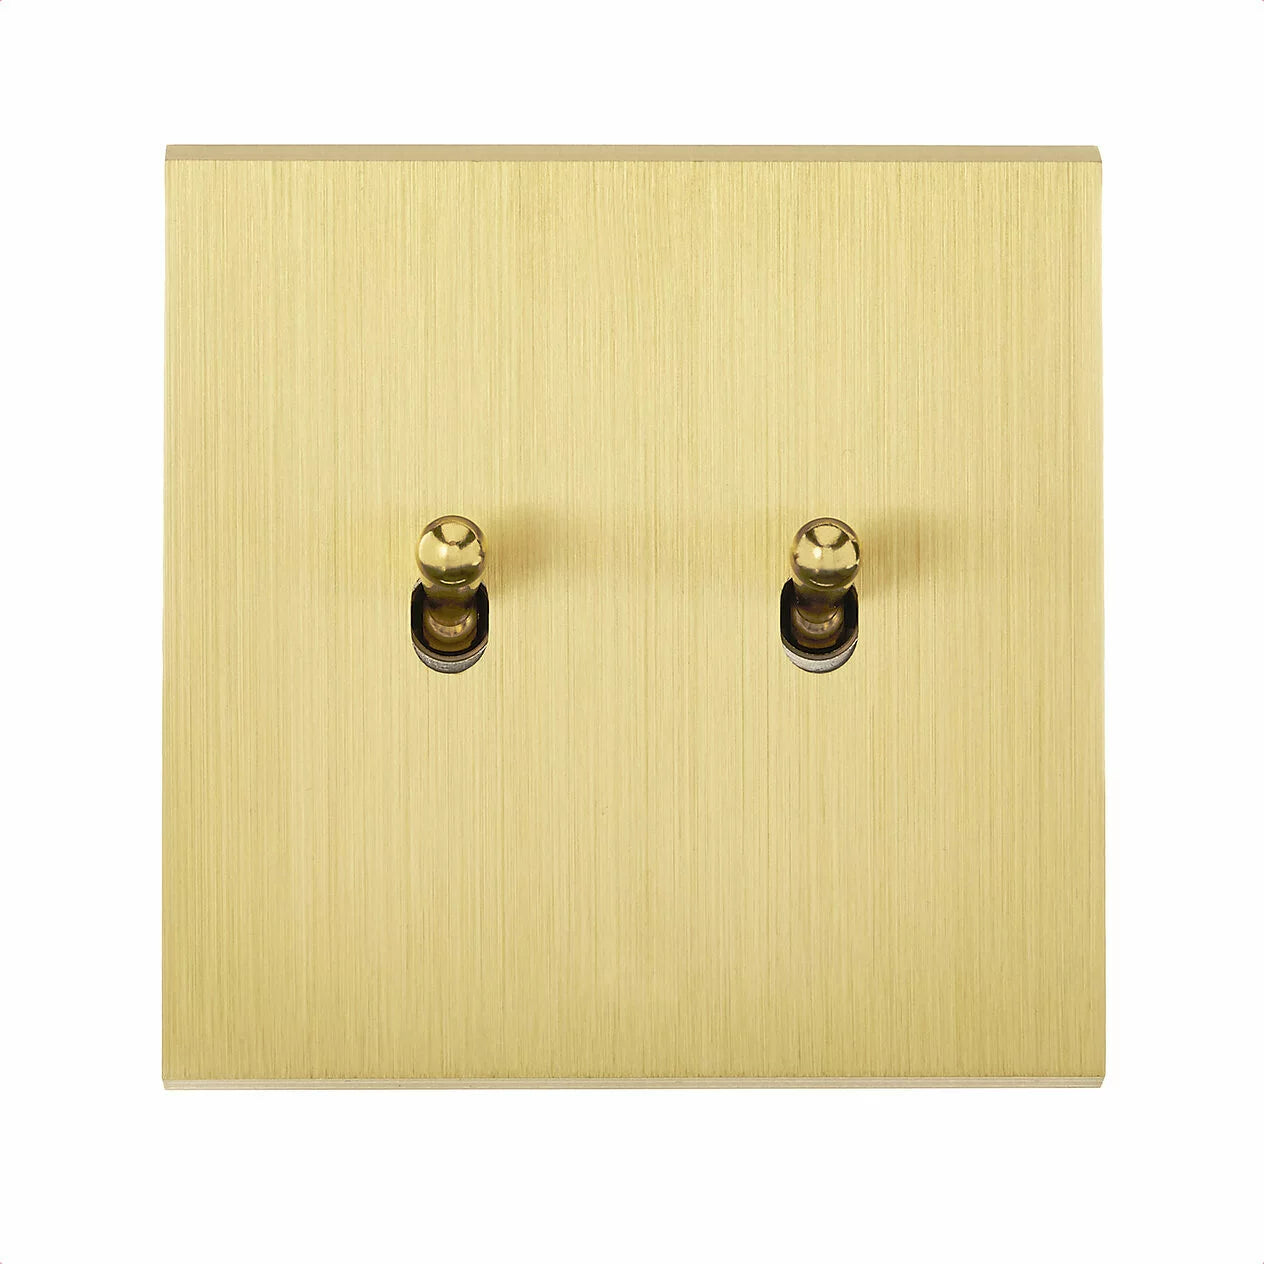 Confidence Collection - Single Cover Plate w Double Two way or Double push or Two way Push Roller Shutter Toggles